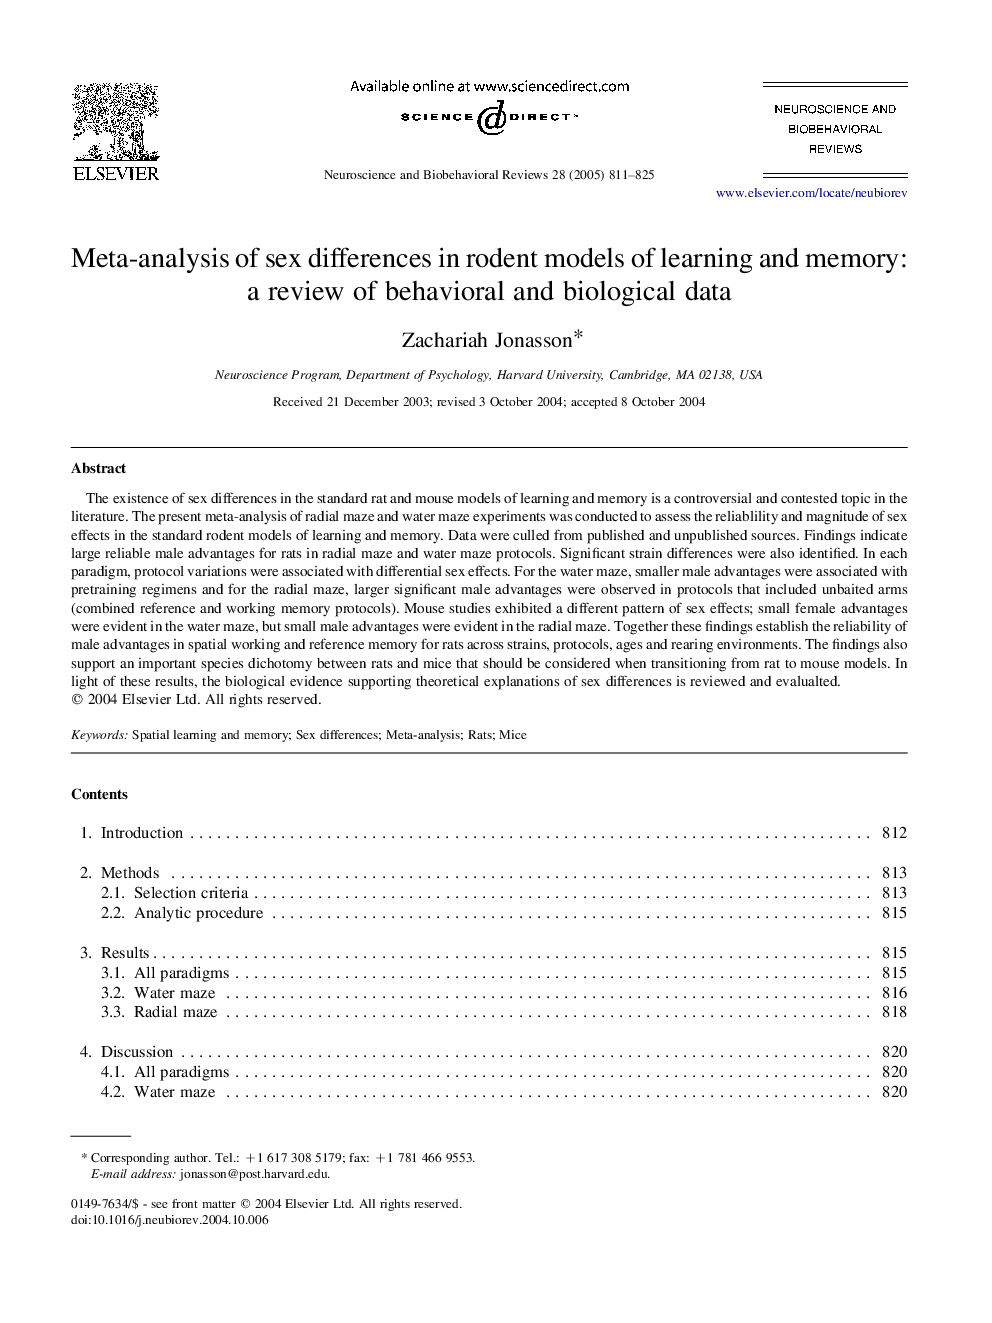 Meta-analysis of sex differences in rodent models of learning and memory: a review of behavioral and biological data